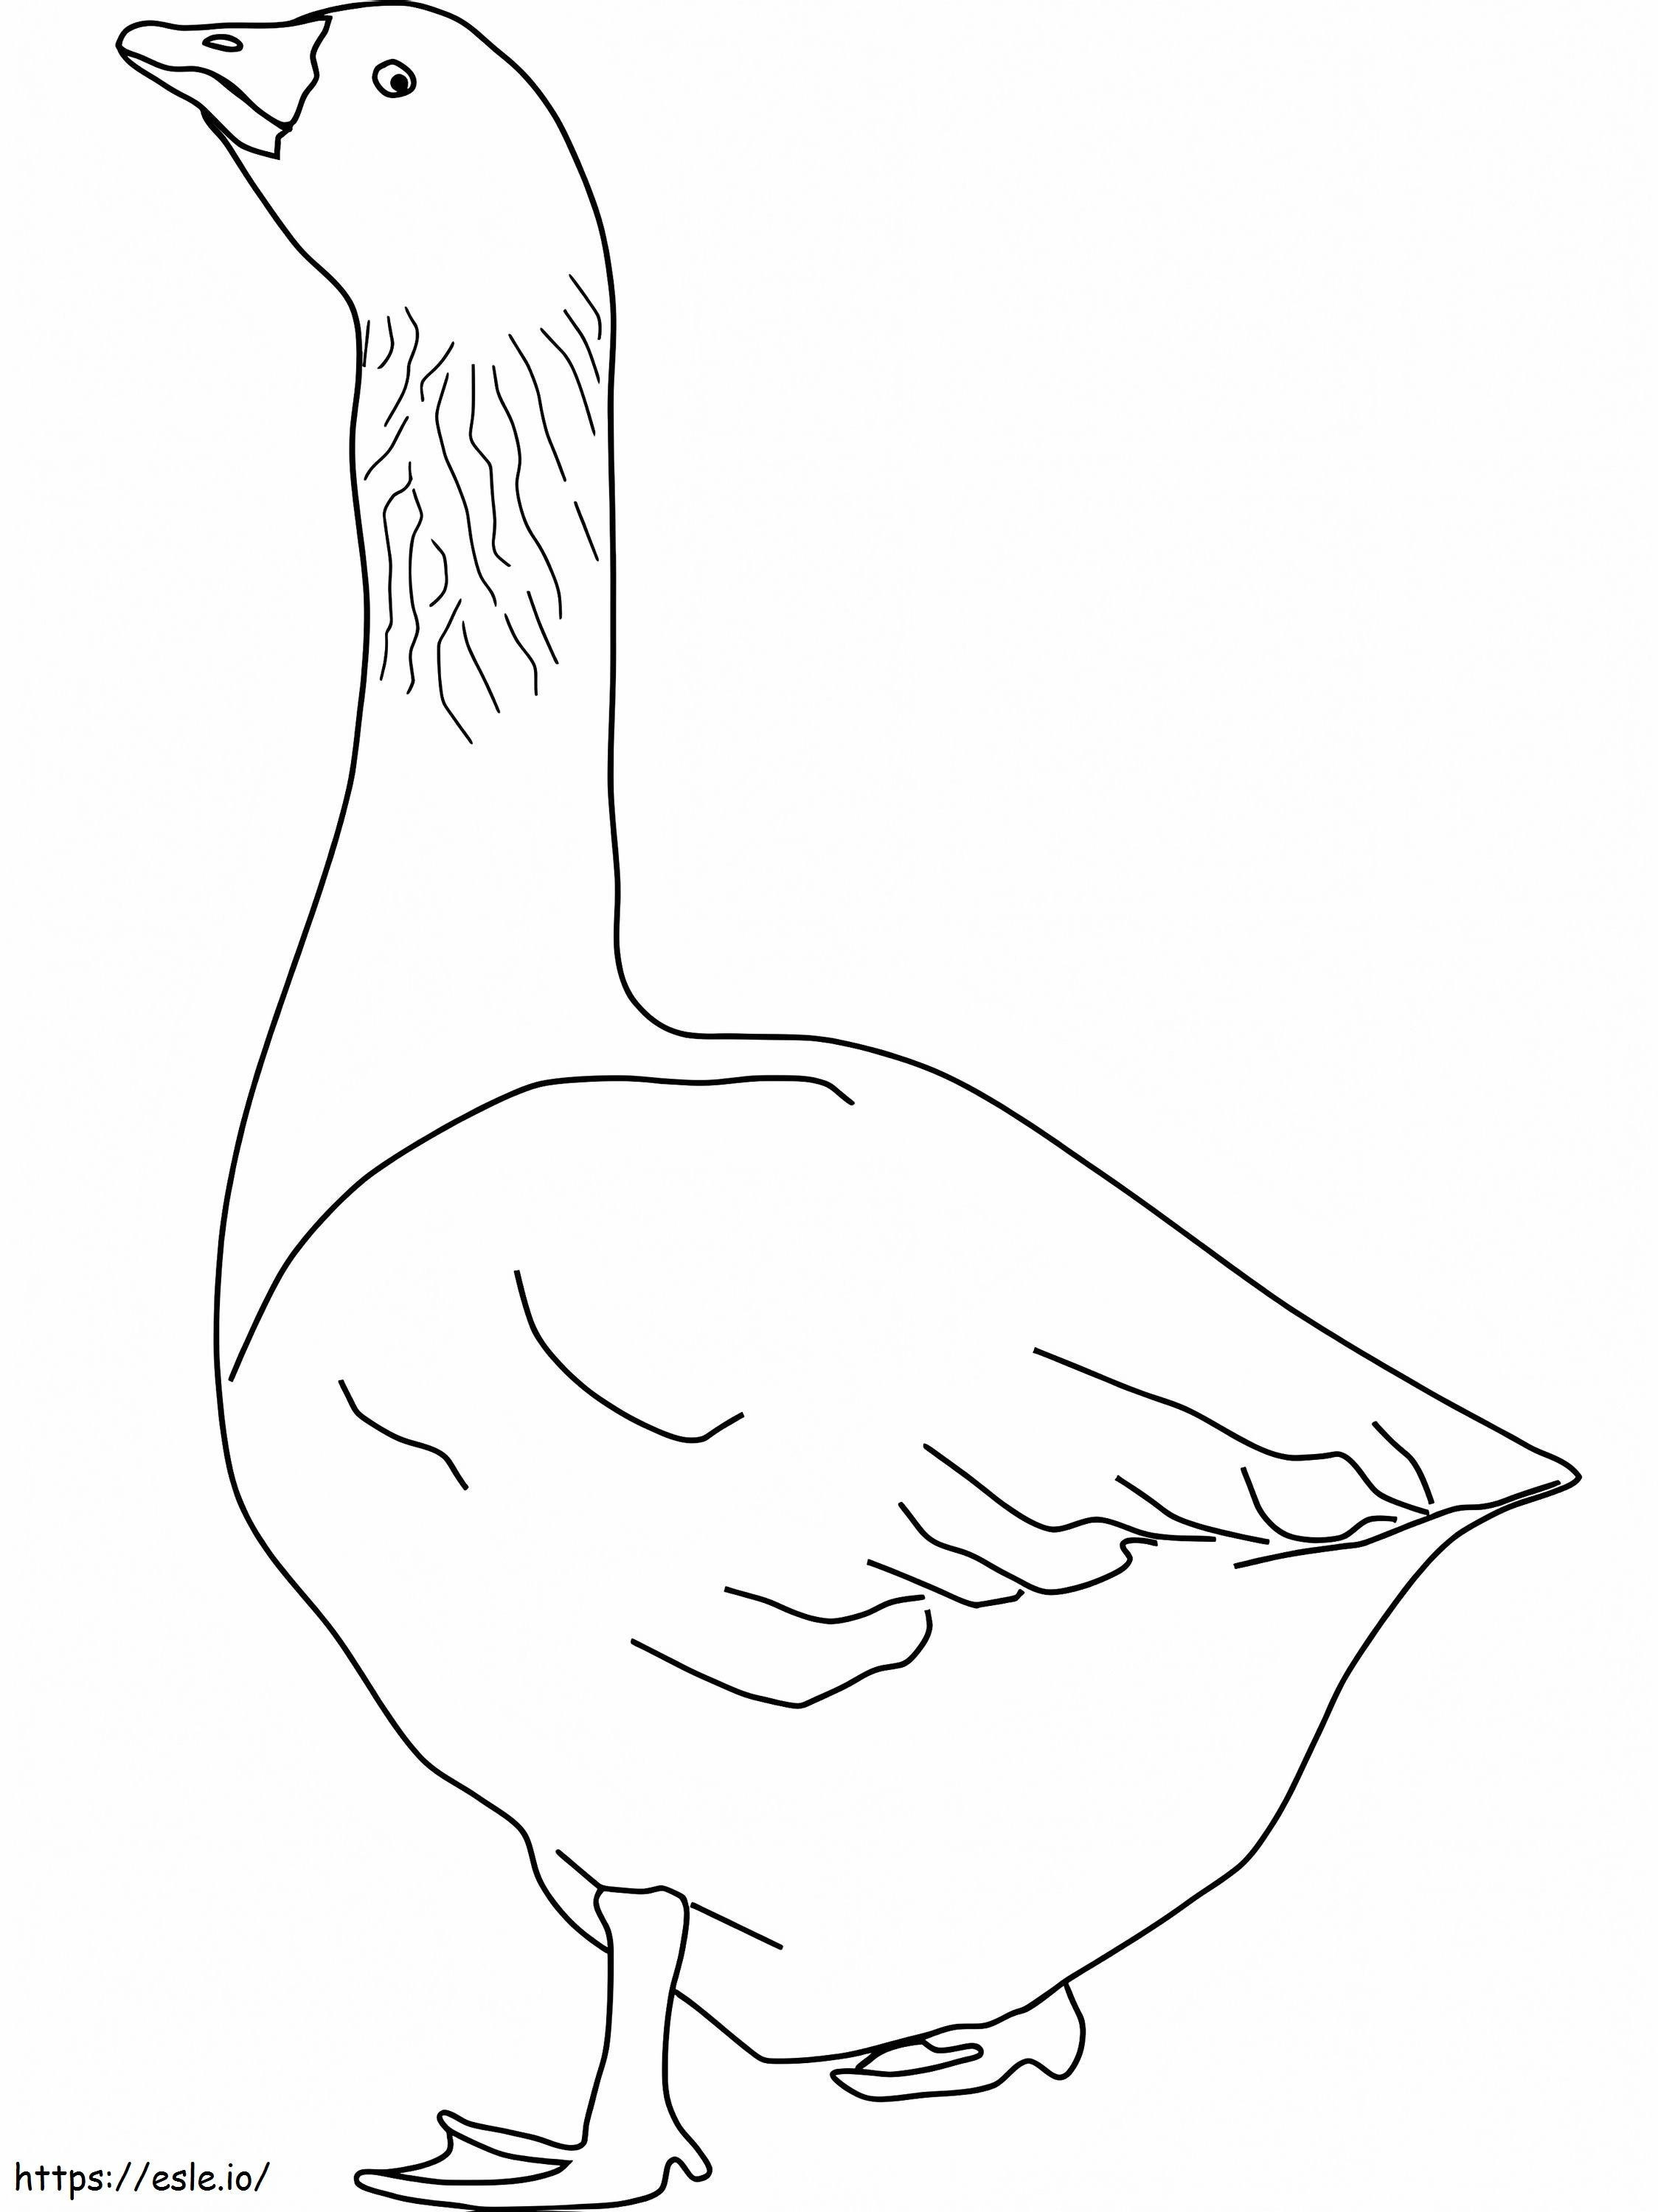 Goose 1 coloring page